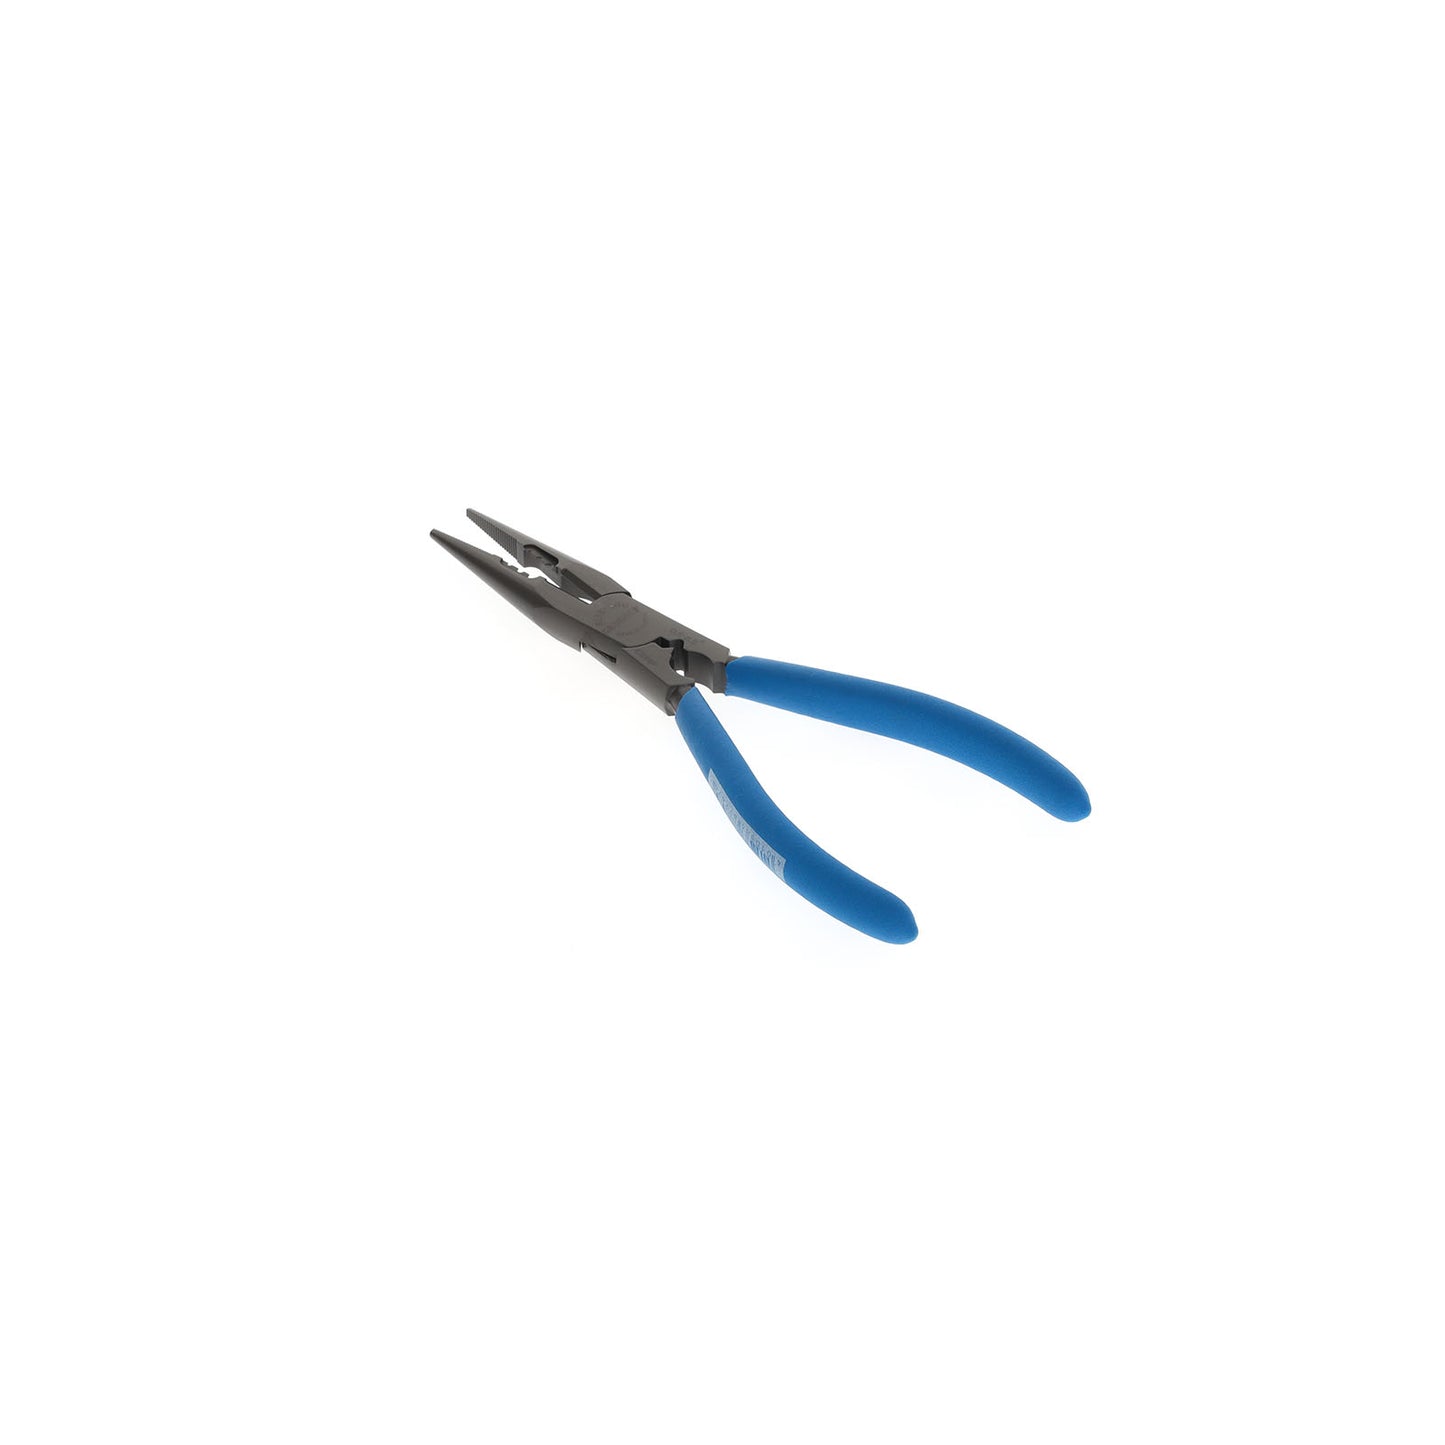 GEDORE 8133-180 TL - Triple Action Pliers 180mm (1997394)